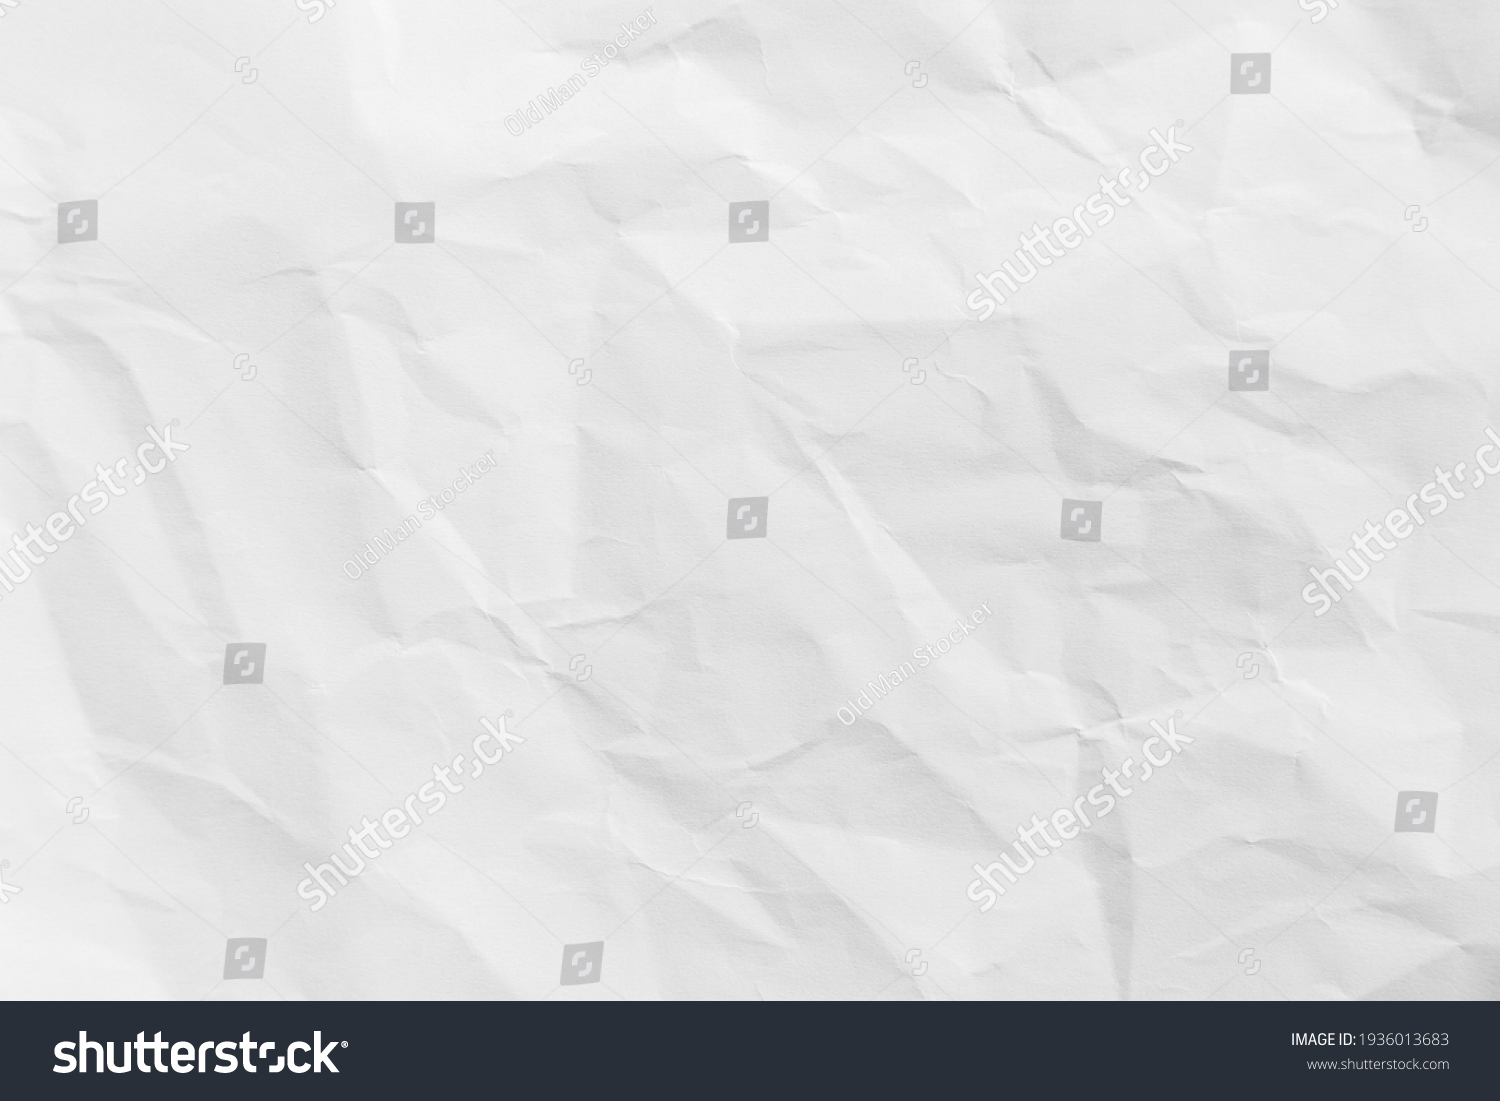 Recycled crumpled white paper texture or paper background for design with copy space for text or image #1936013683